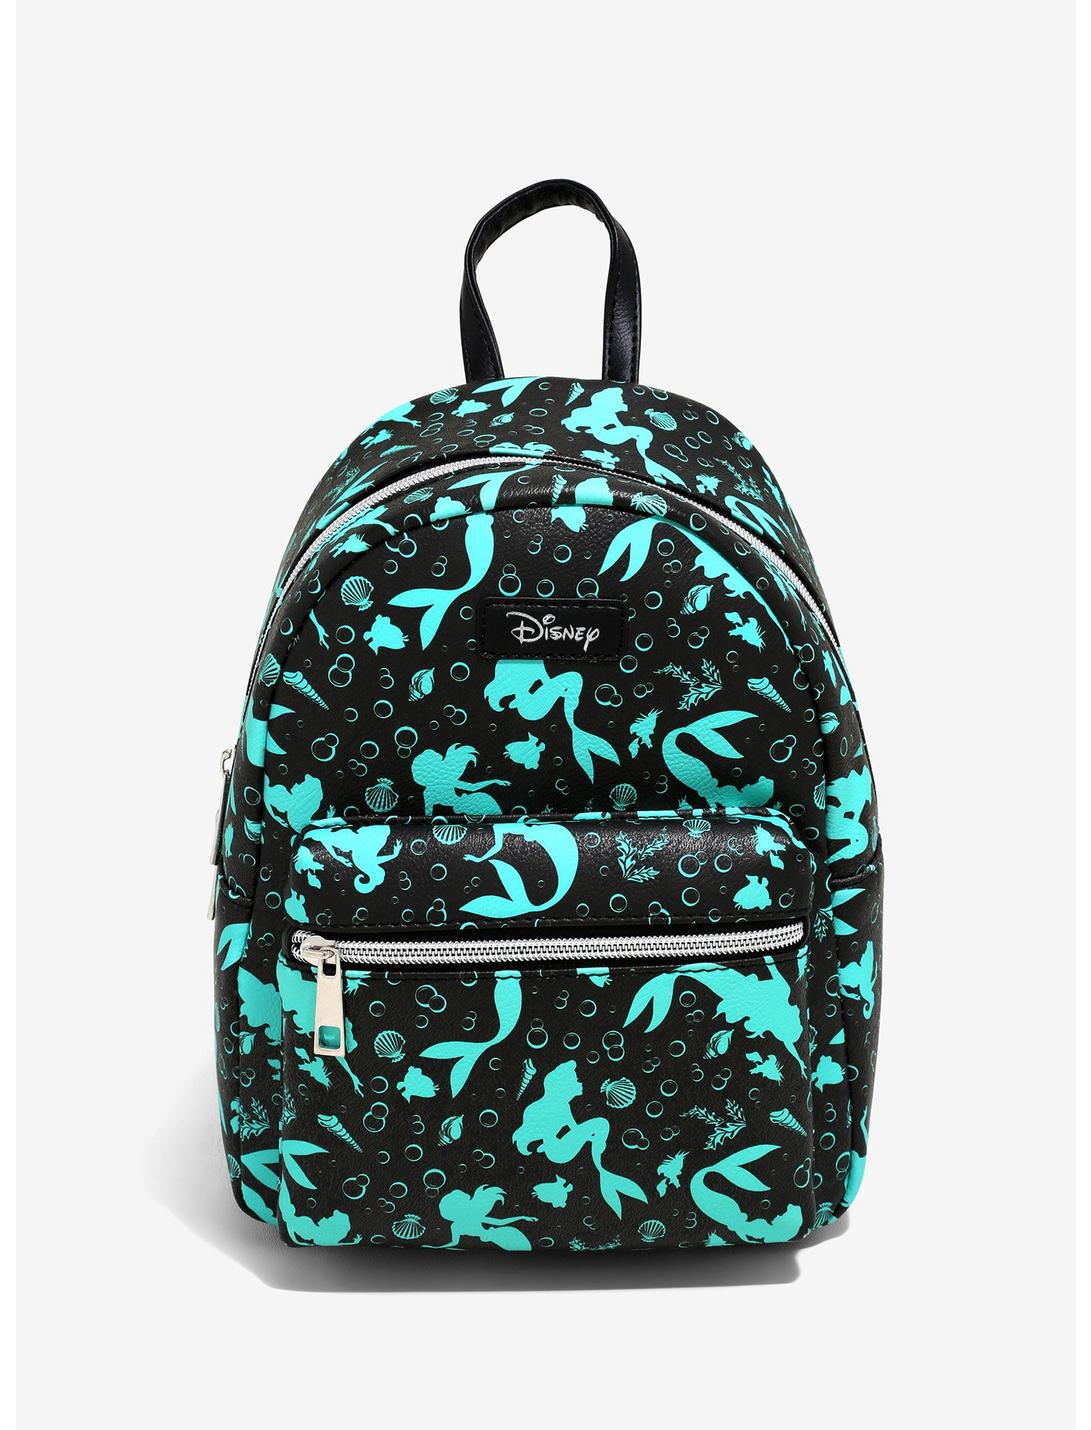 Loungefly Disney The Little Mermaid Teal Silhouette Mini Backpack, , hi-res